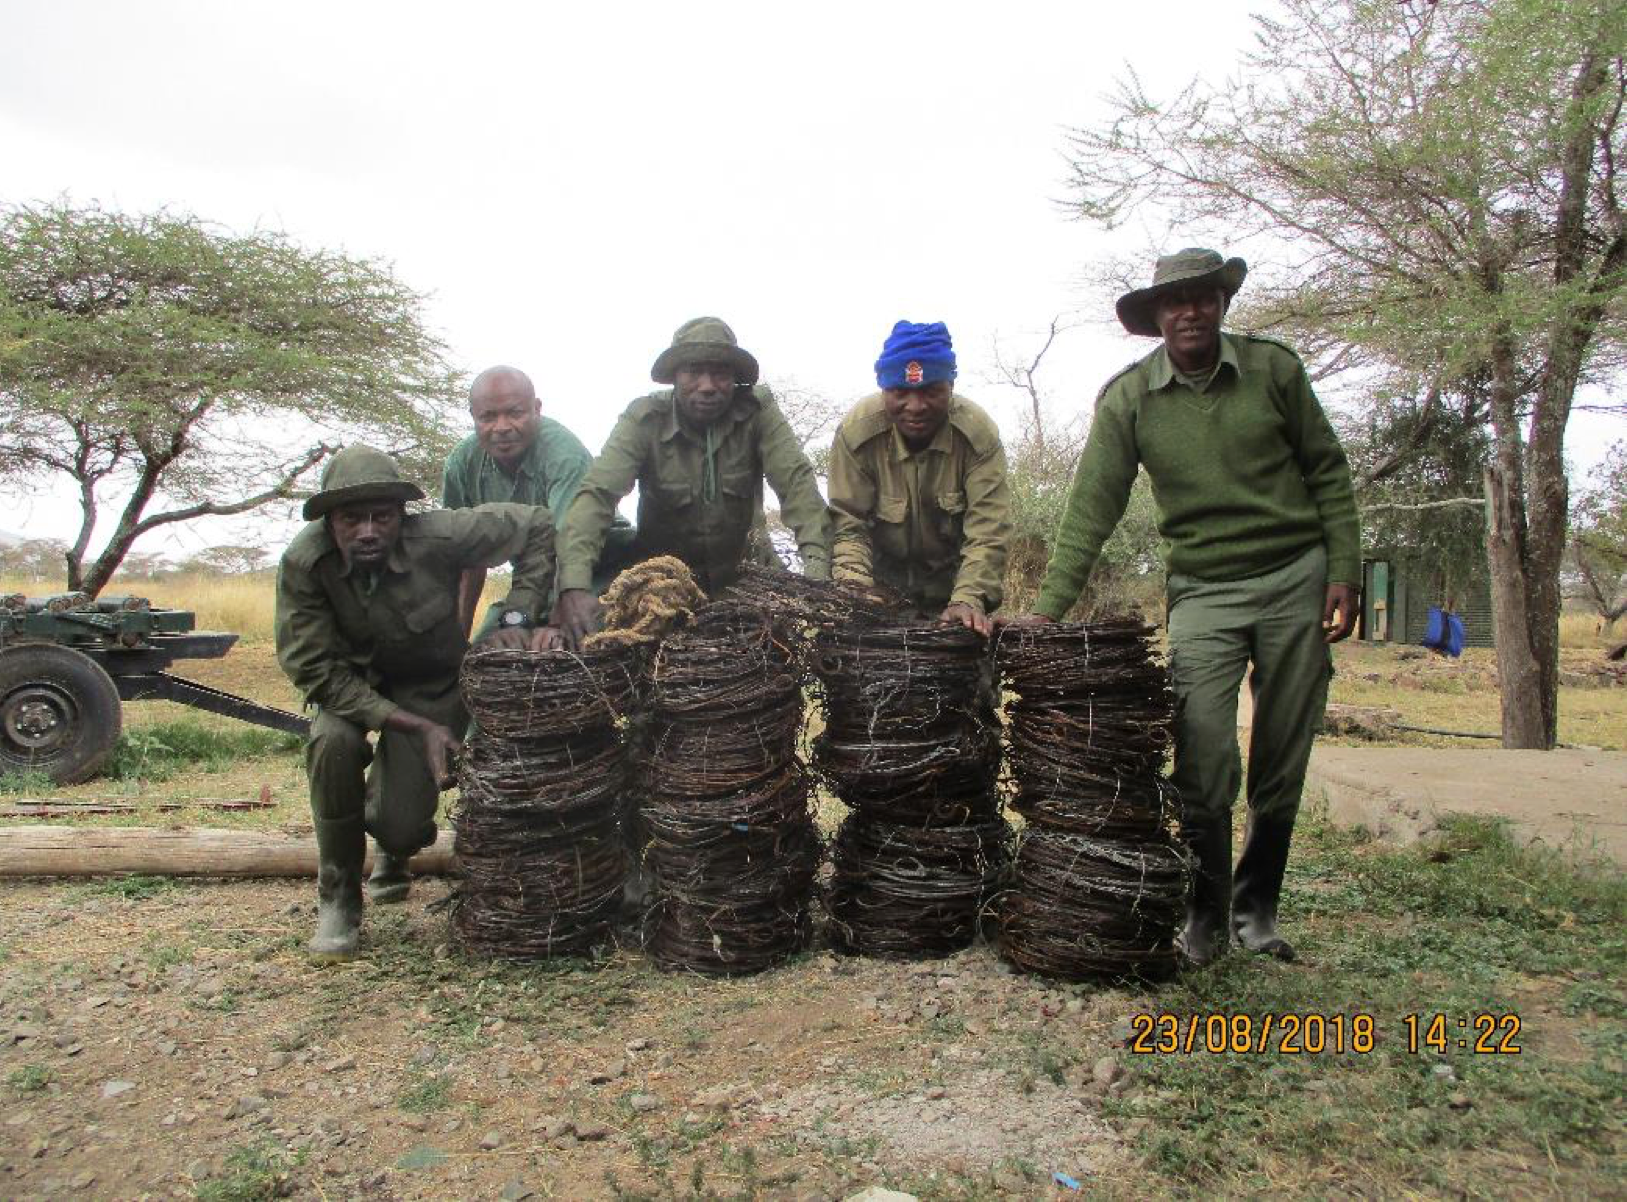  The Serengeti de-snaring team with snares from 10 days patrolling 